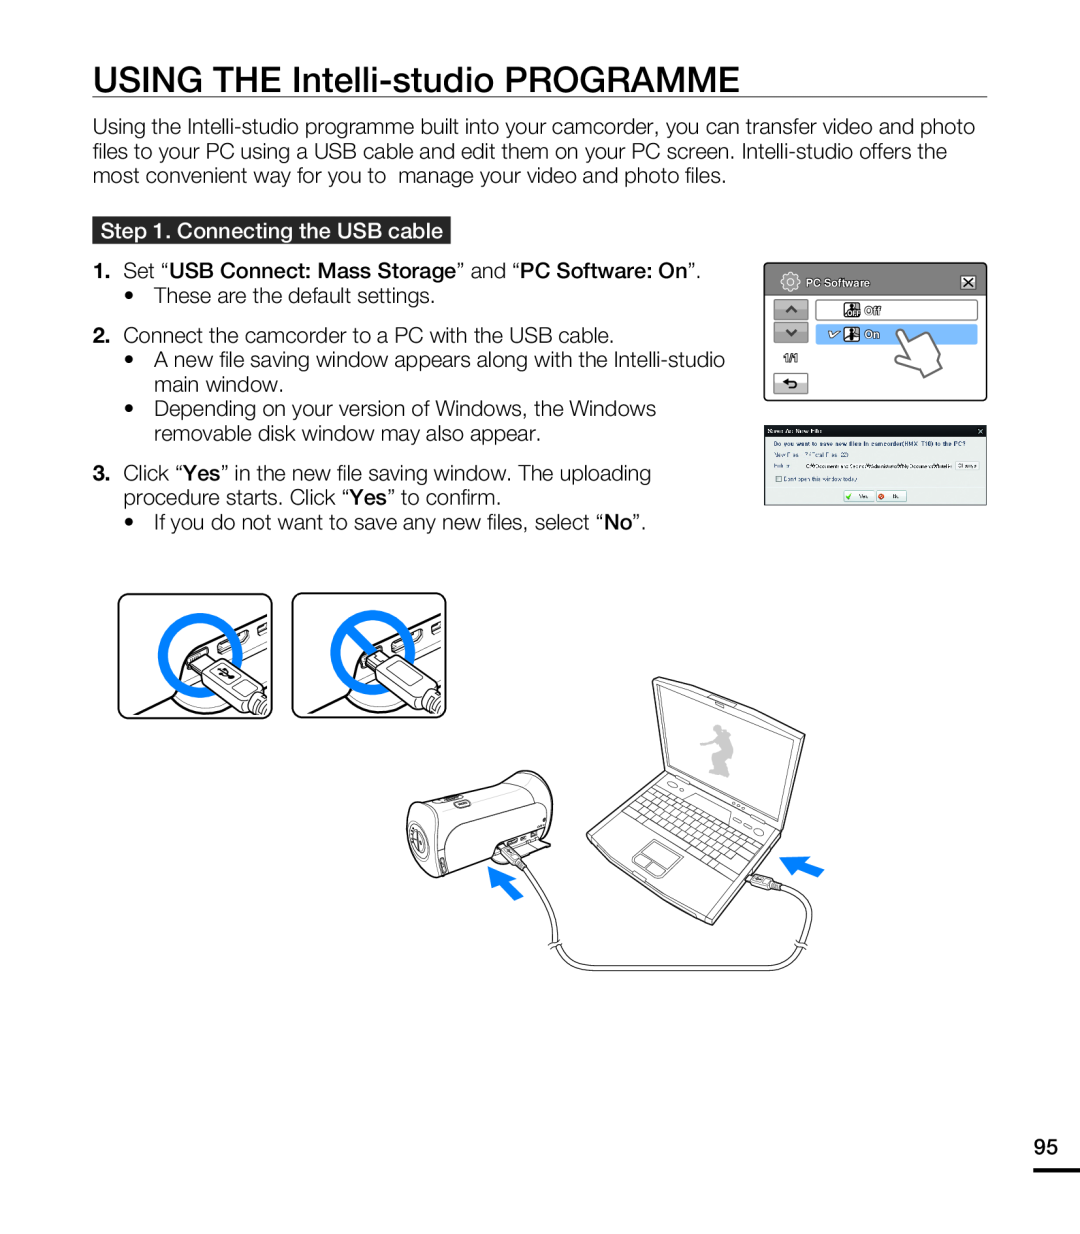 Samsung HMX-T10BP/XER, HMX-T10WP/EDC, HMX-T10OP/EDC manual USING THE Intelli-studio PROGRAMME, Connecting the USB cable 